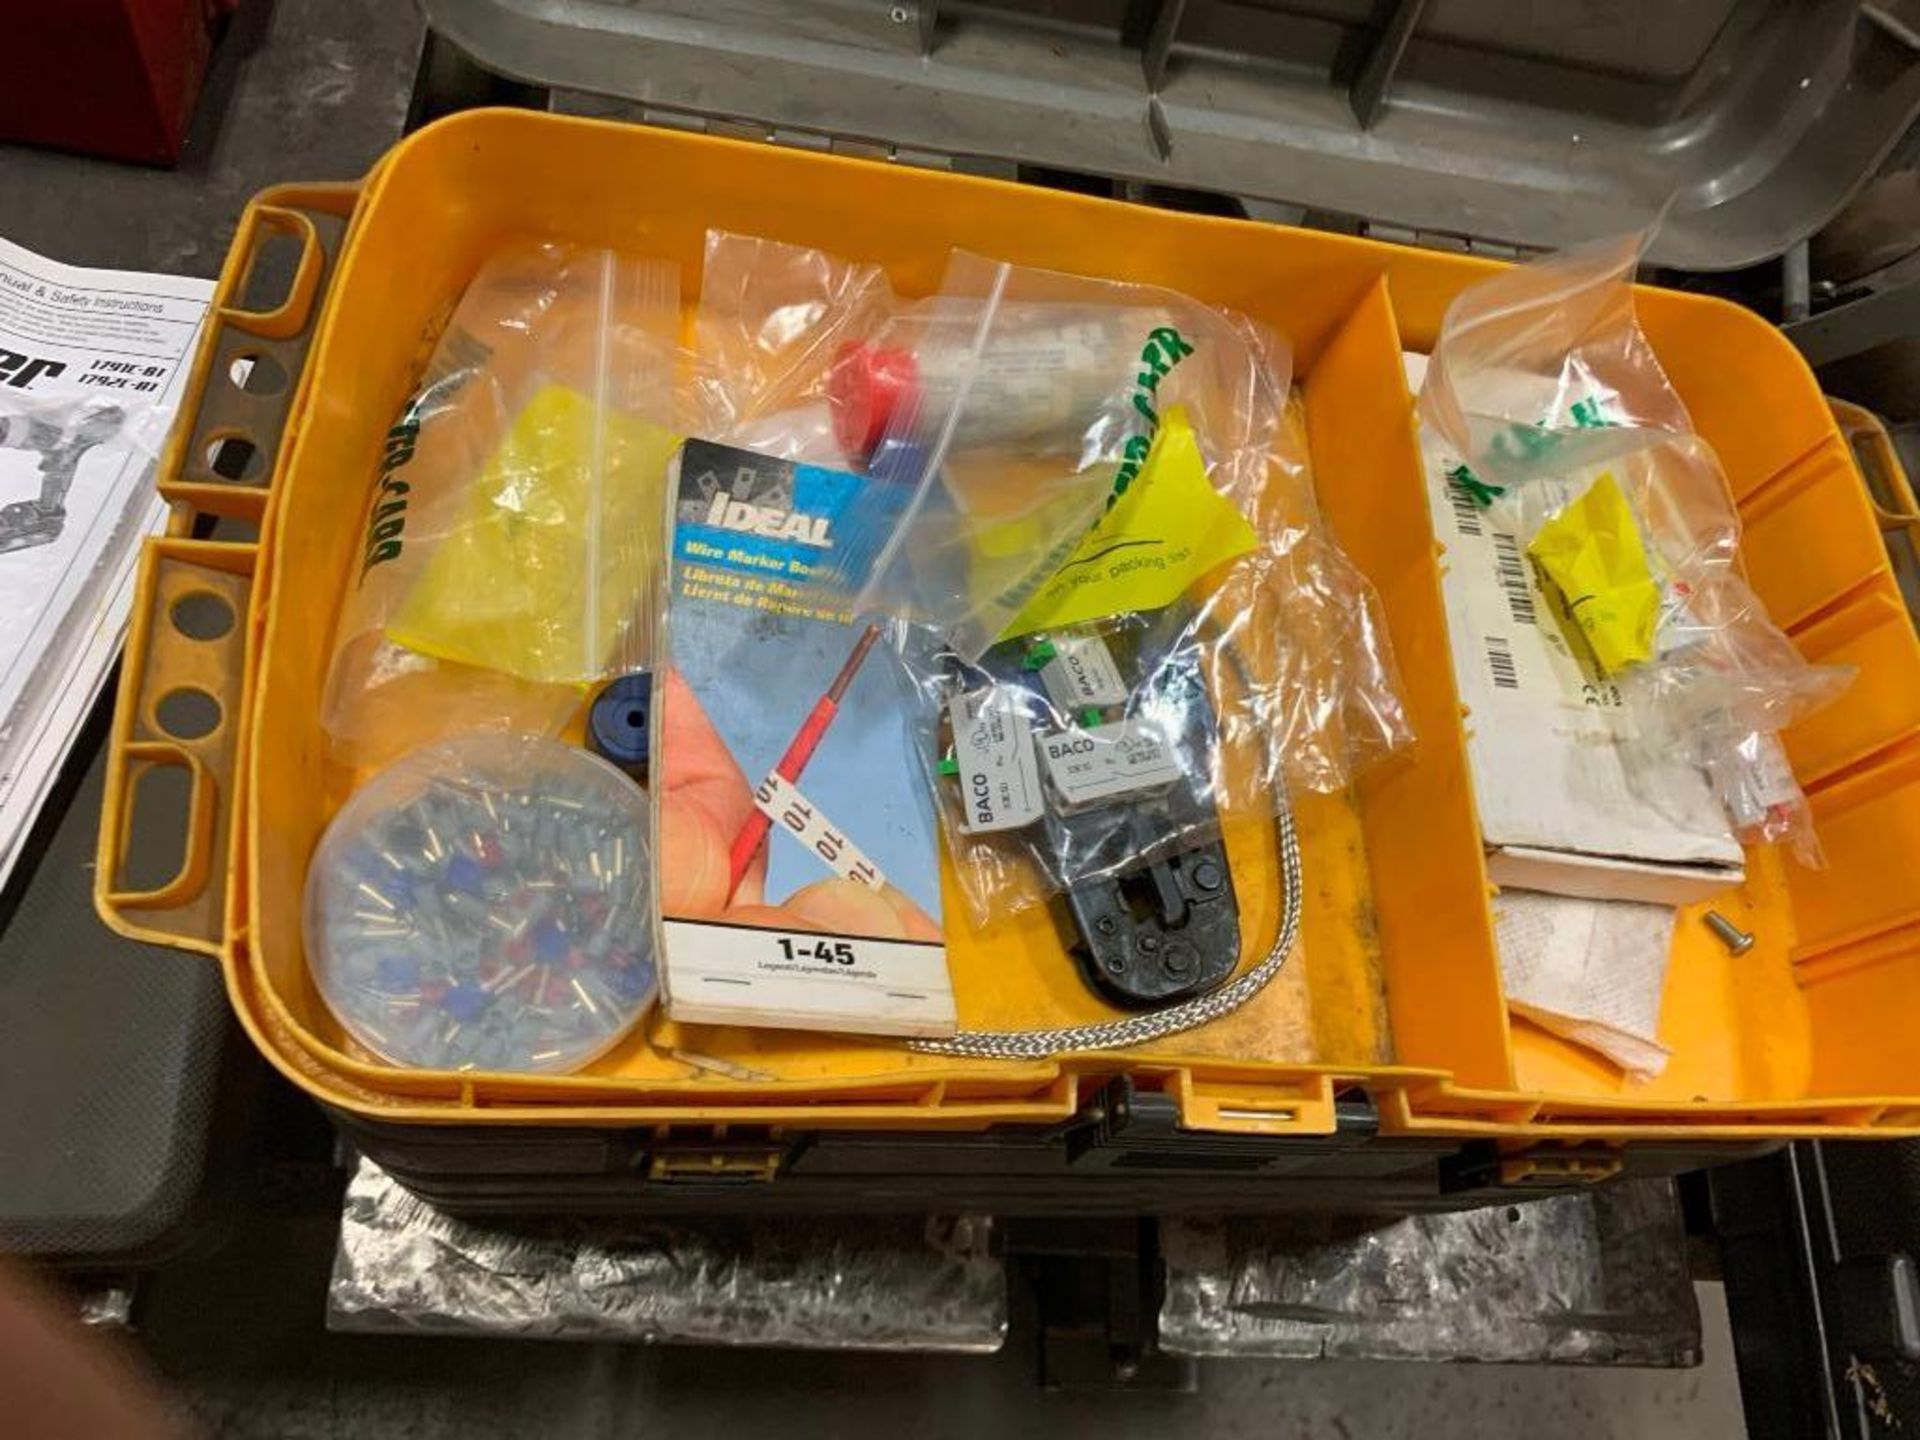 PLANO TACKLE BOX, W/ ELECTRICAL SUPPLIES - Image 2 of 3